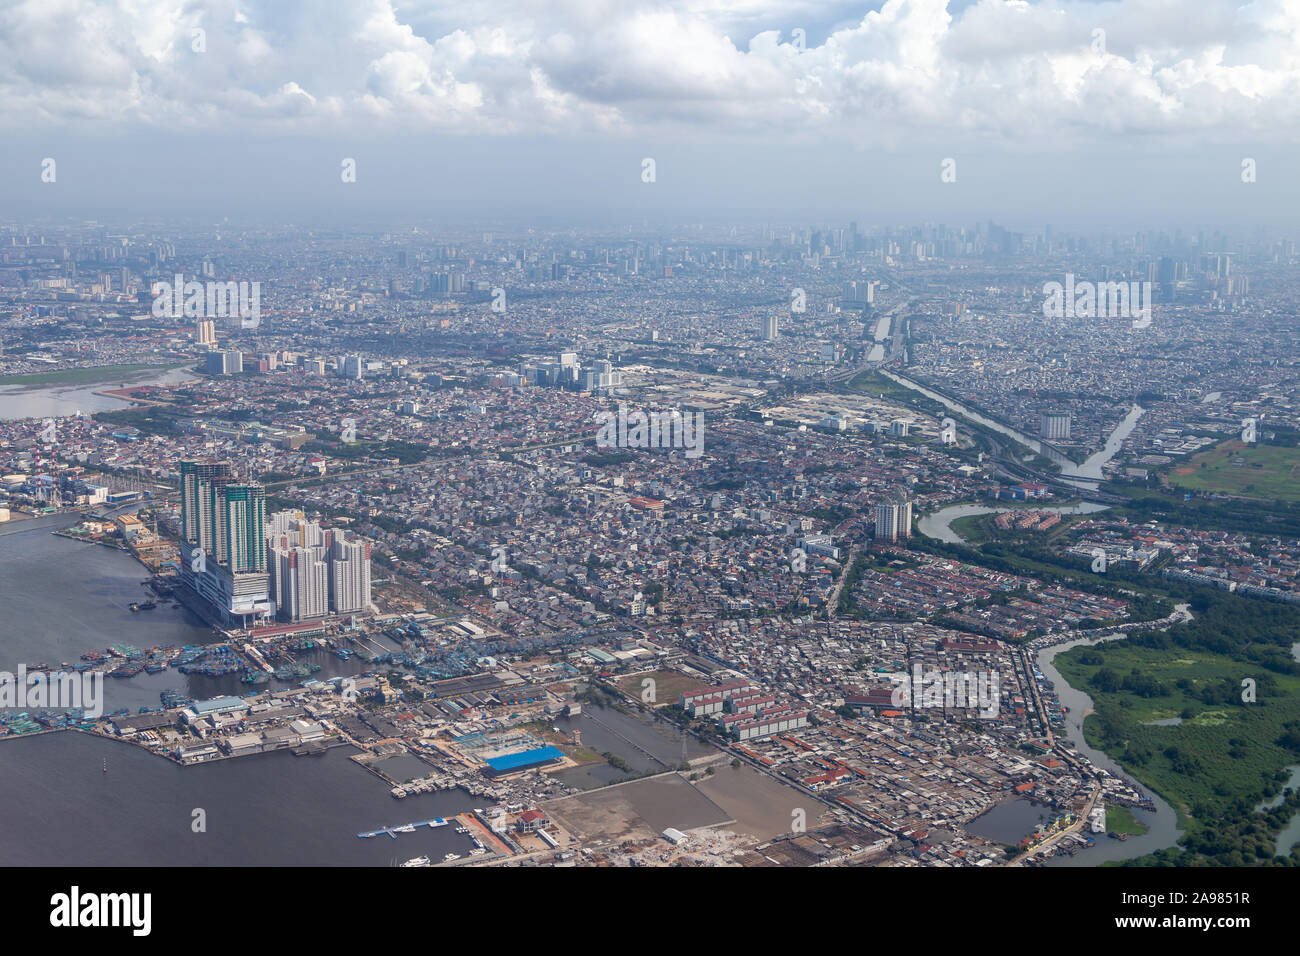 Aerial view of Jakarta. Sunda Kelapa Port can be seen in the lower left corner. Some clouds are visible on this day with high visibility. The central Stock Photo